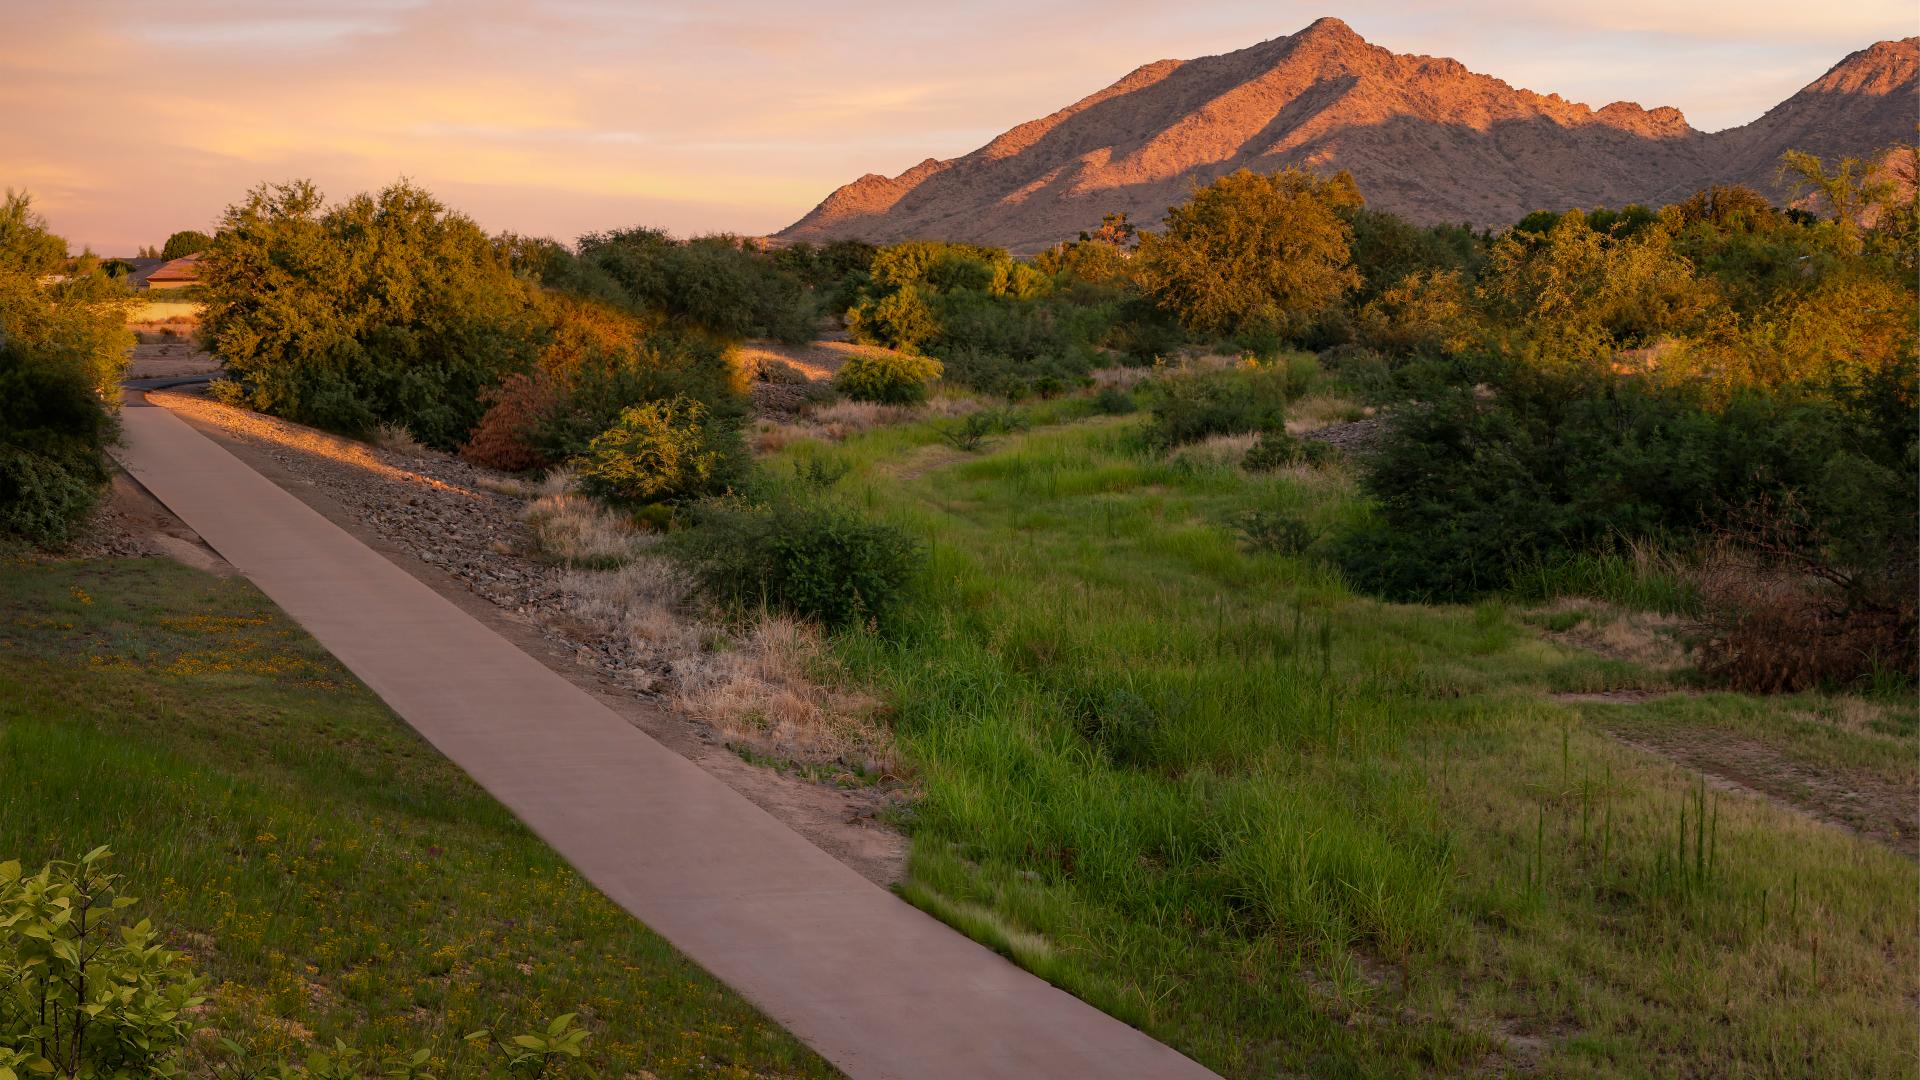 Easy access to the Queen Creek Wash Trail with beautiful mountain views